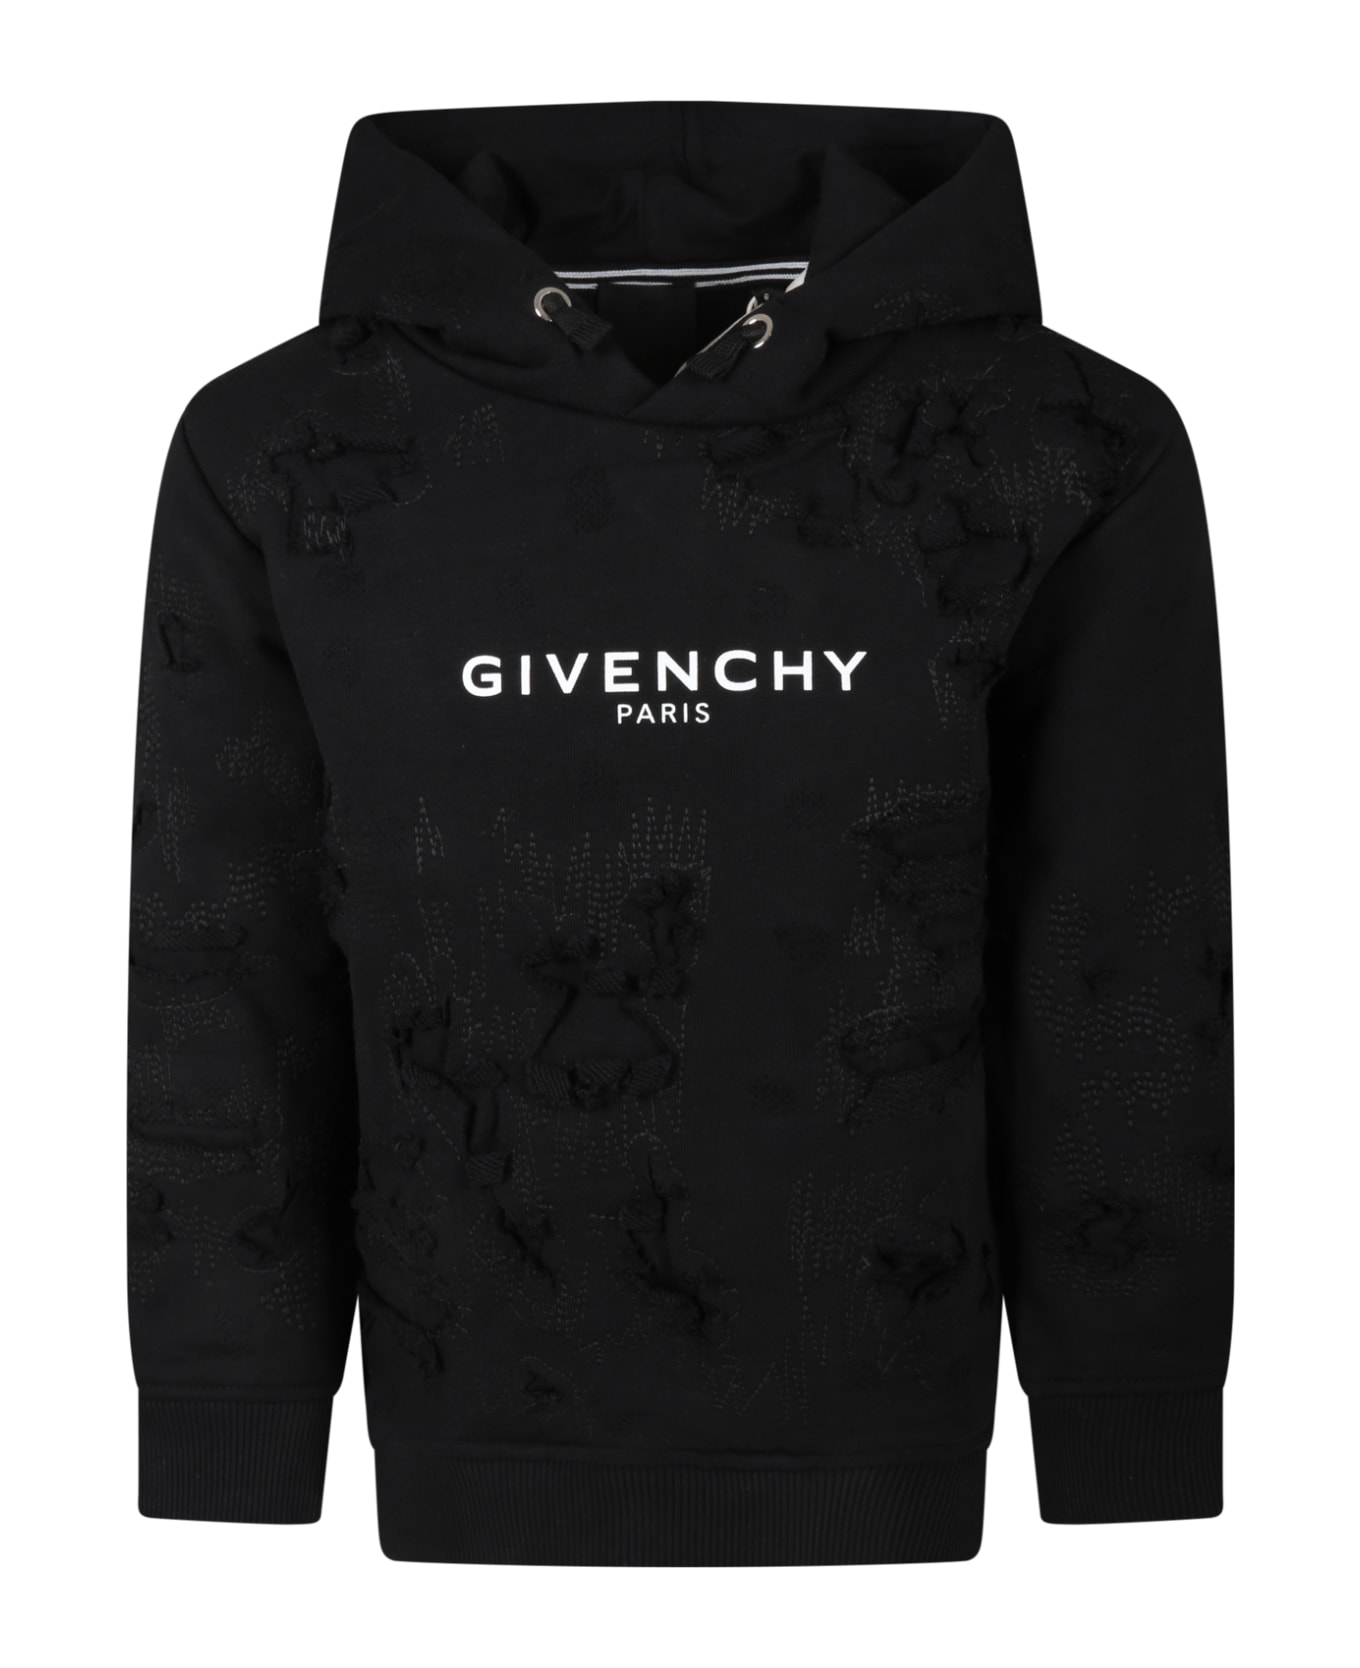 Givenchy Black Sweatshirt For Boy With Fake Rips And White Logo - Black